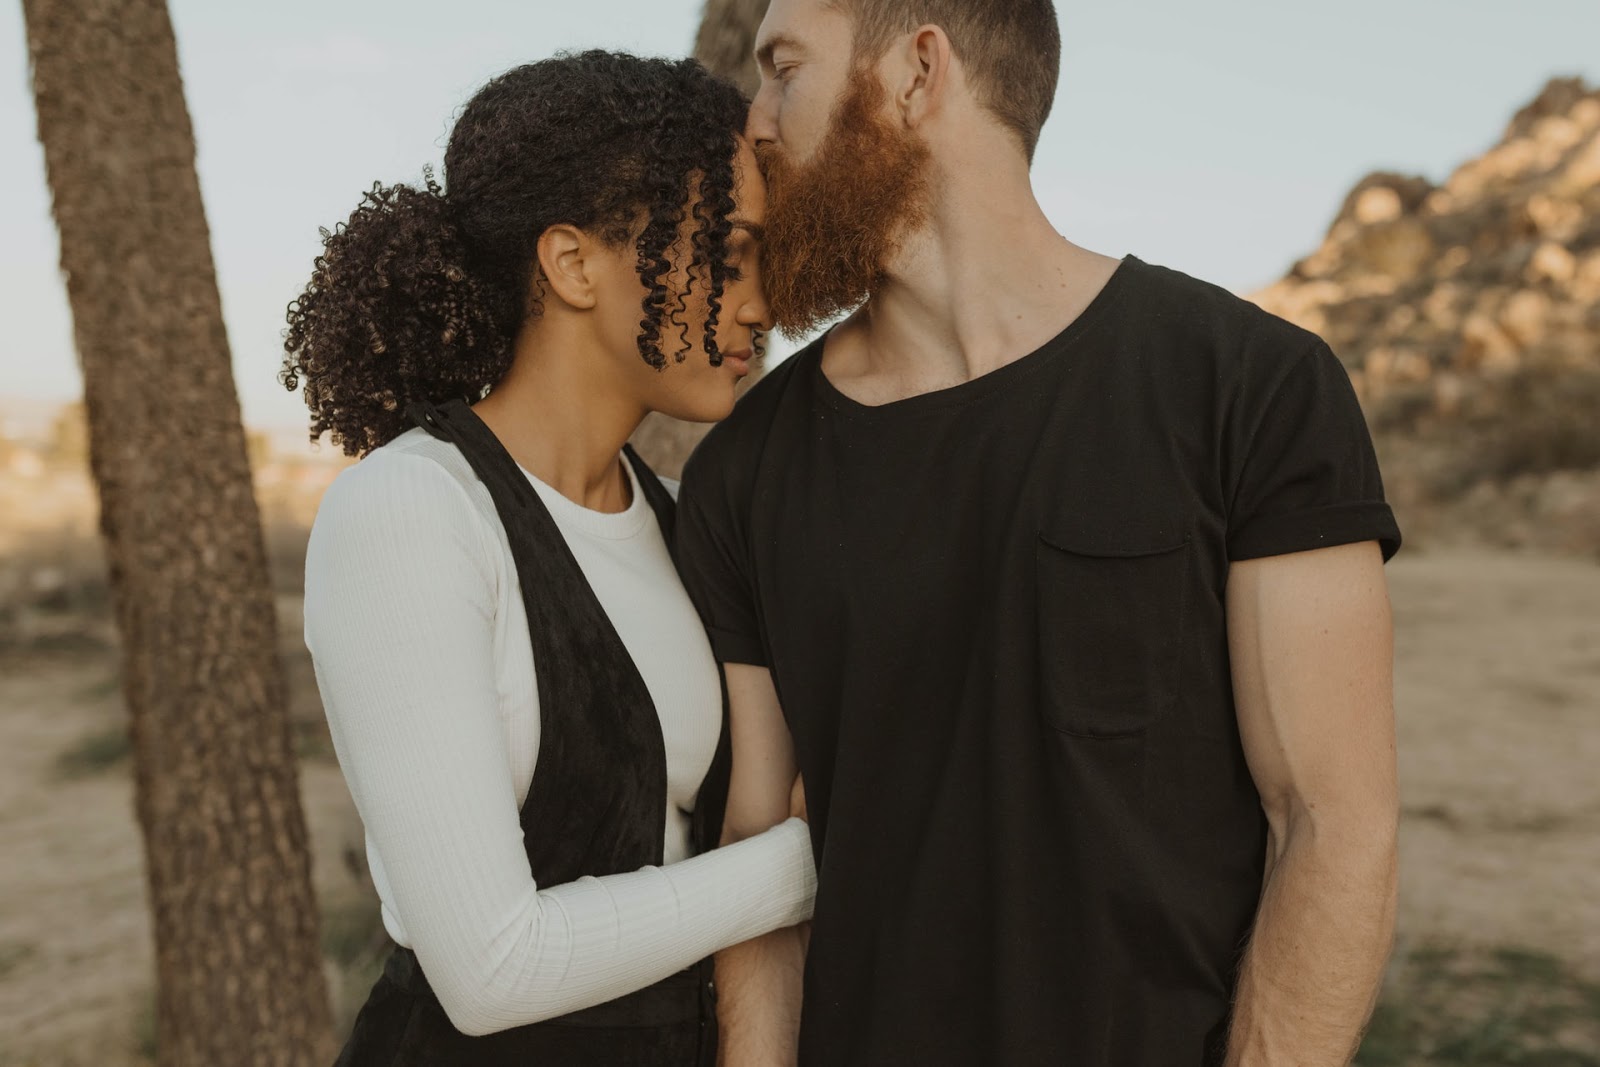 How to Avoid Growing Apart in a Long-Term Relationship